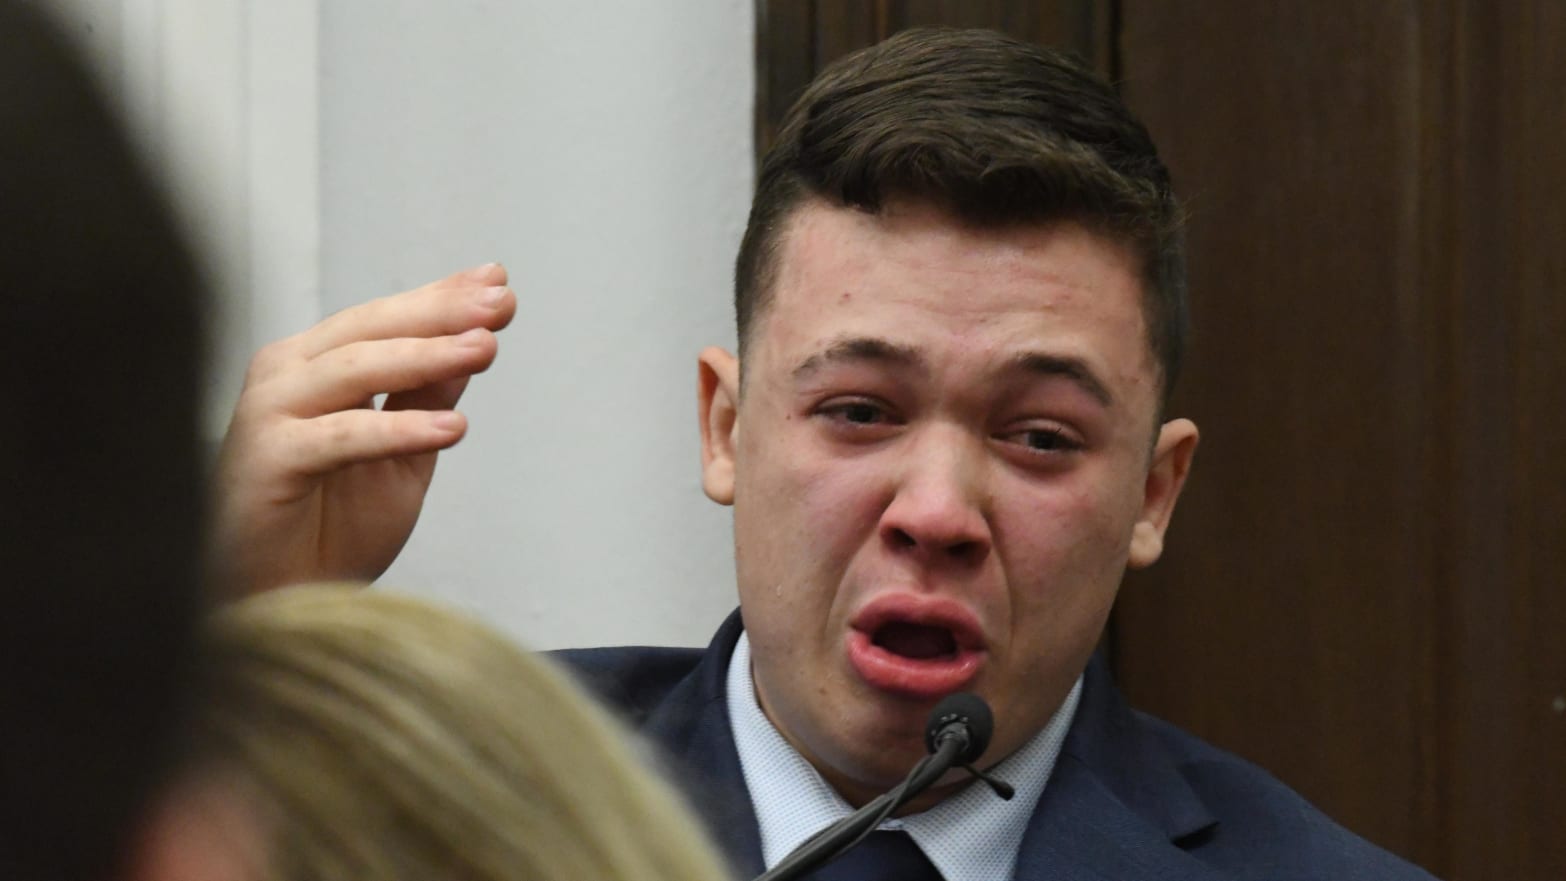 Kyle Rittenhouse becomes emotional describing events leading up to the shooting of Joseph Rosenbaum as he testifies during his trial at the Kenosha County Courthouse on November 10, 2021 in Kenosha, Wisconsin.